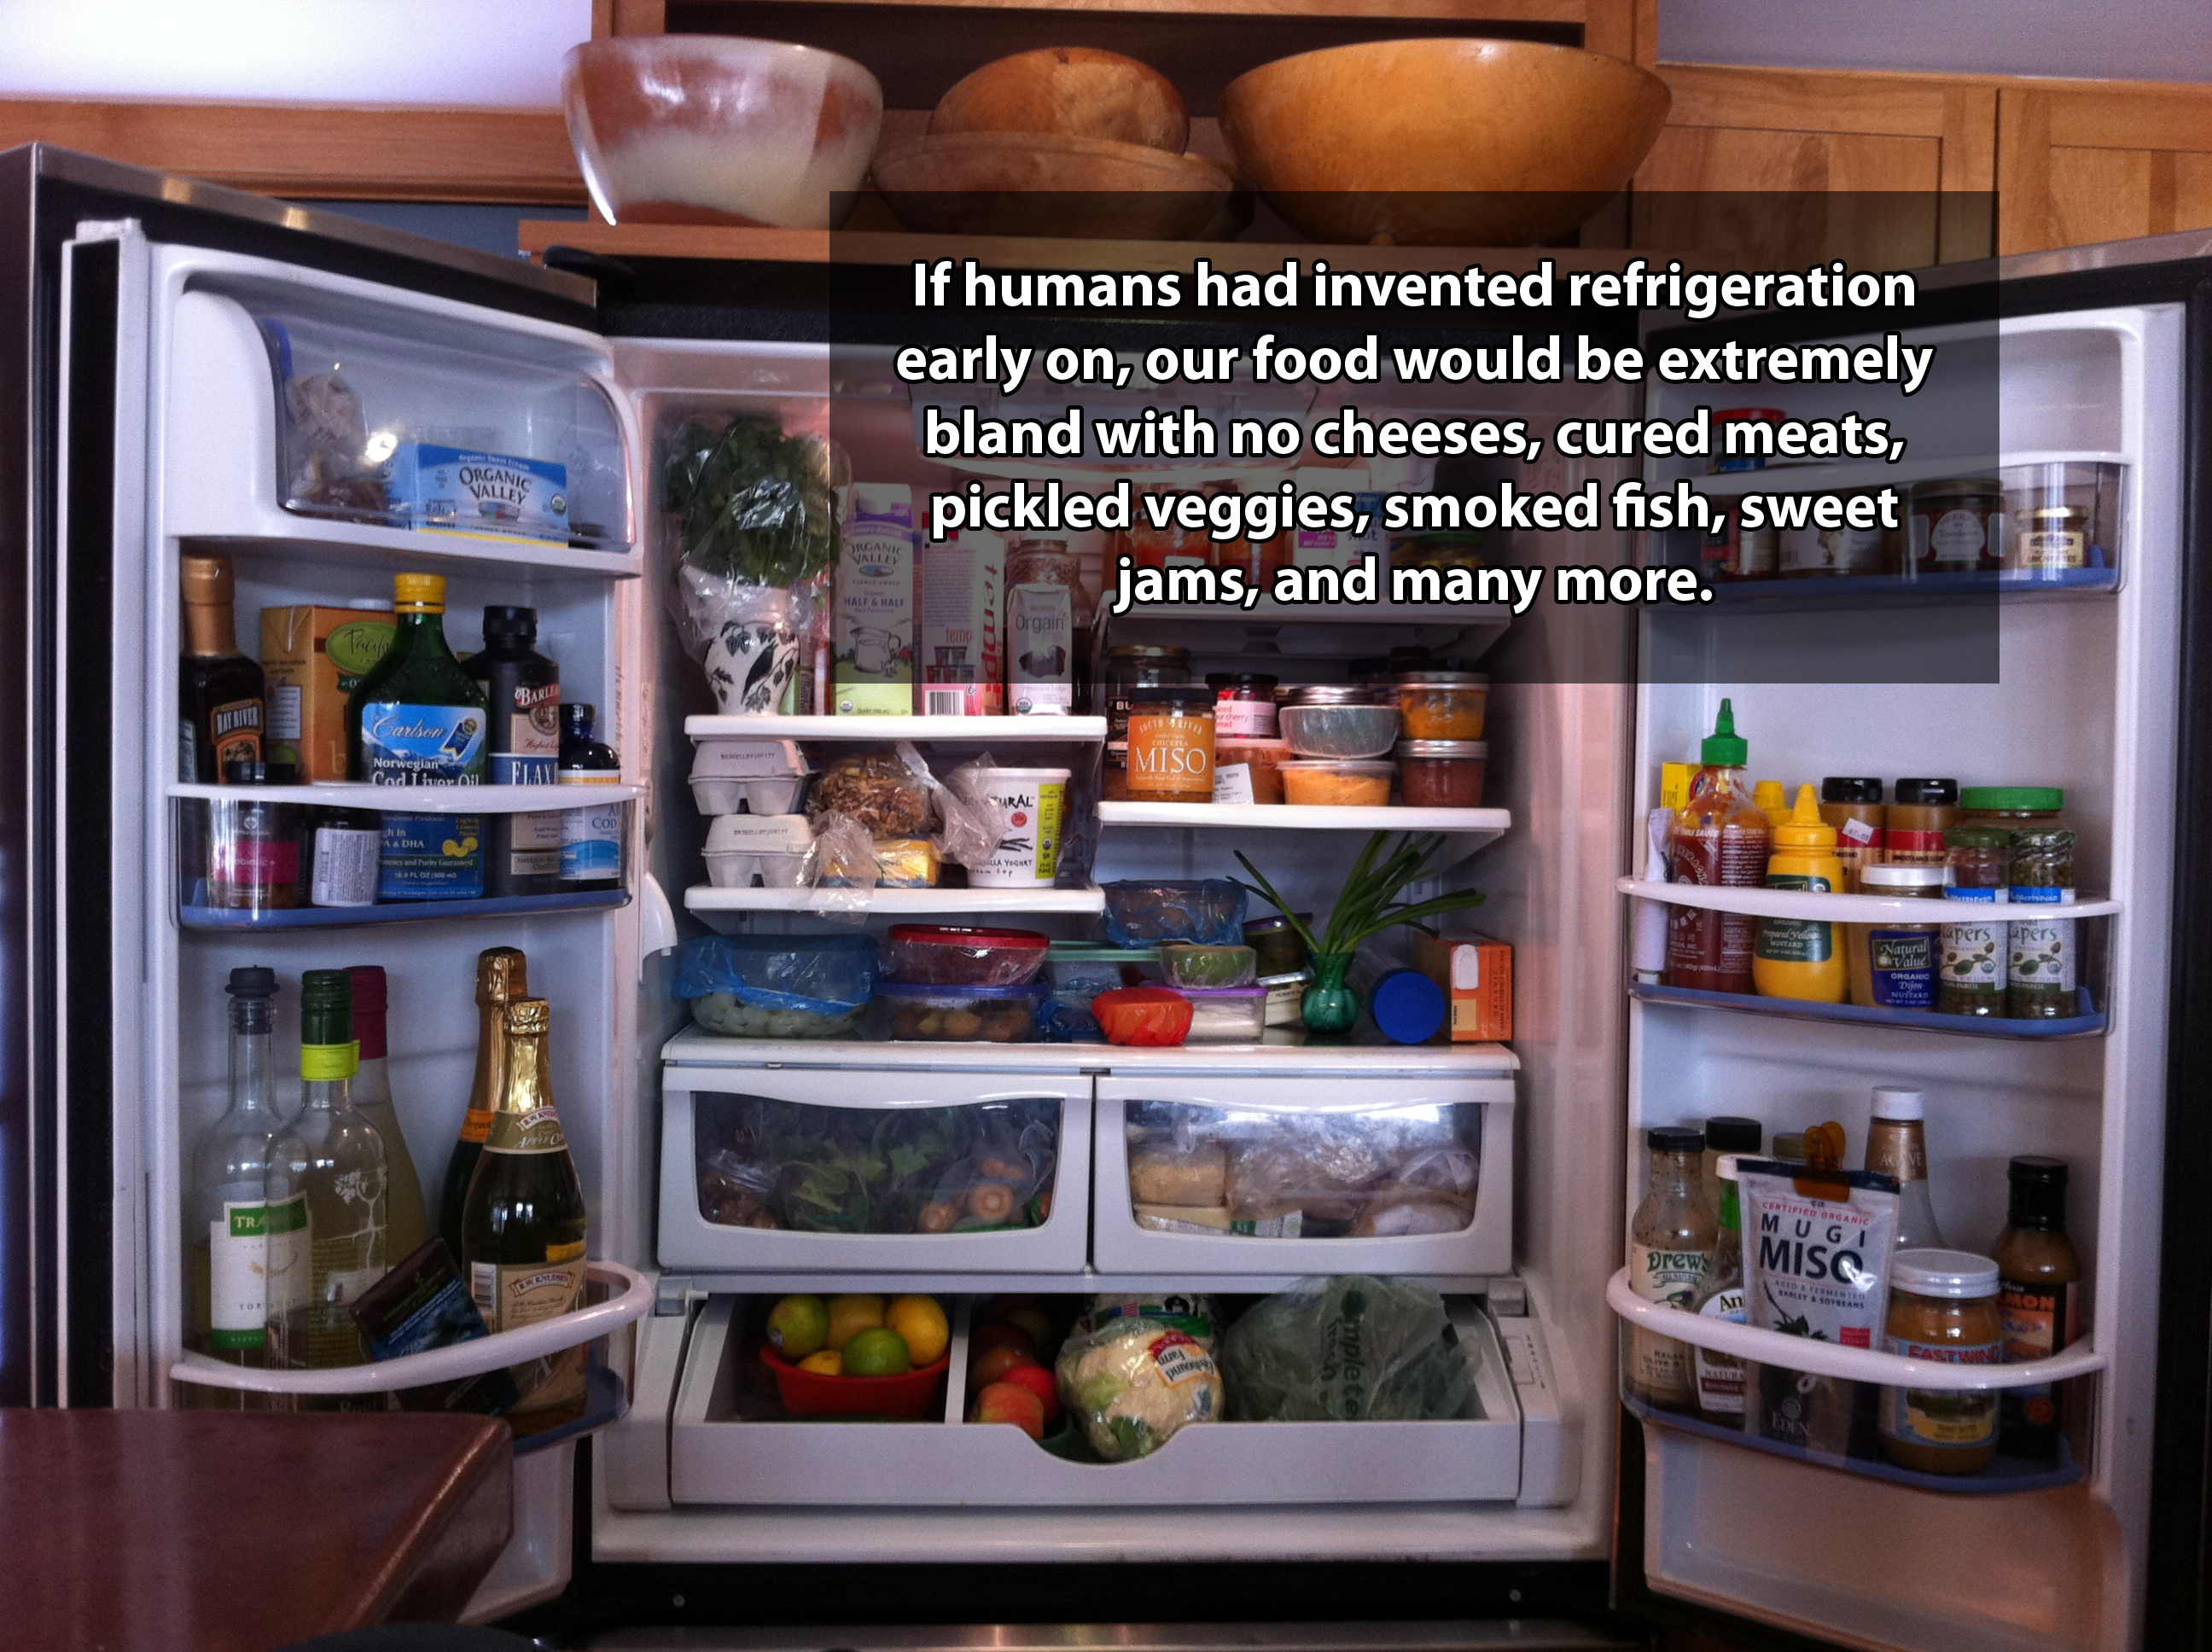 shower thought maintain a fridge - If humans had invented refrigeration early on, our food would be extremely bland with no cheeses, cured meats, pickled veggies, smoked fish, sweet jams, and many more. Miss